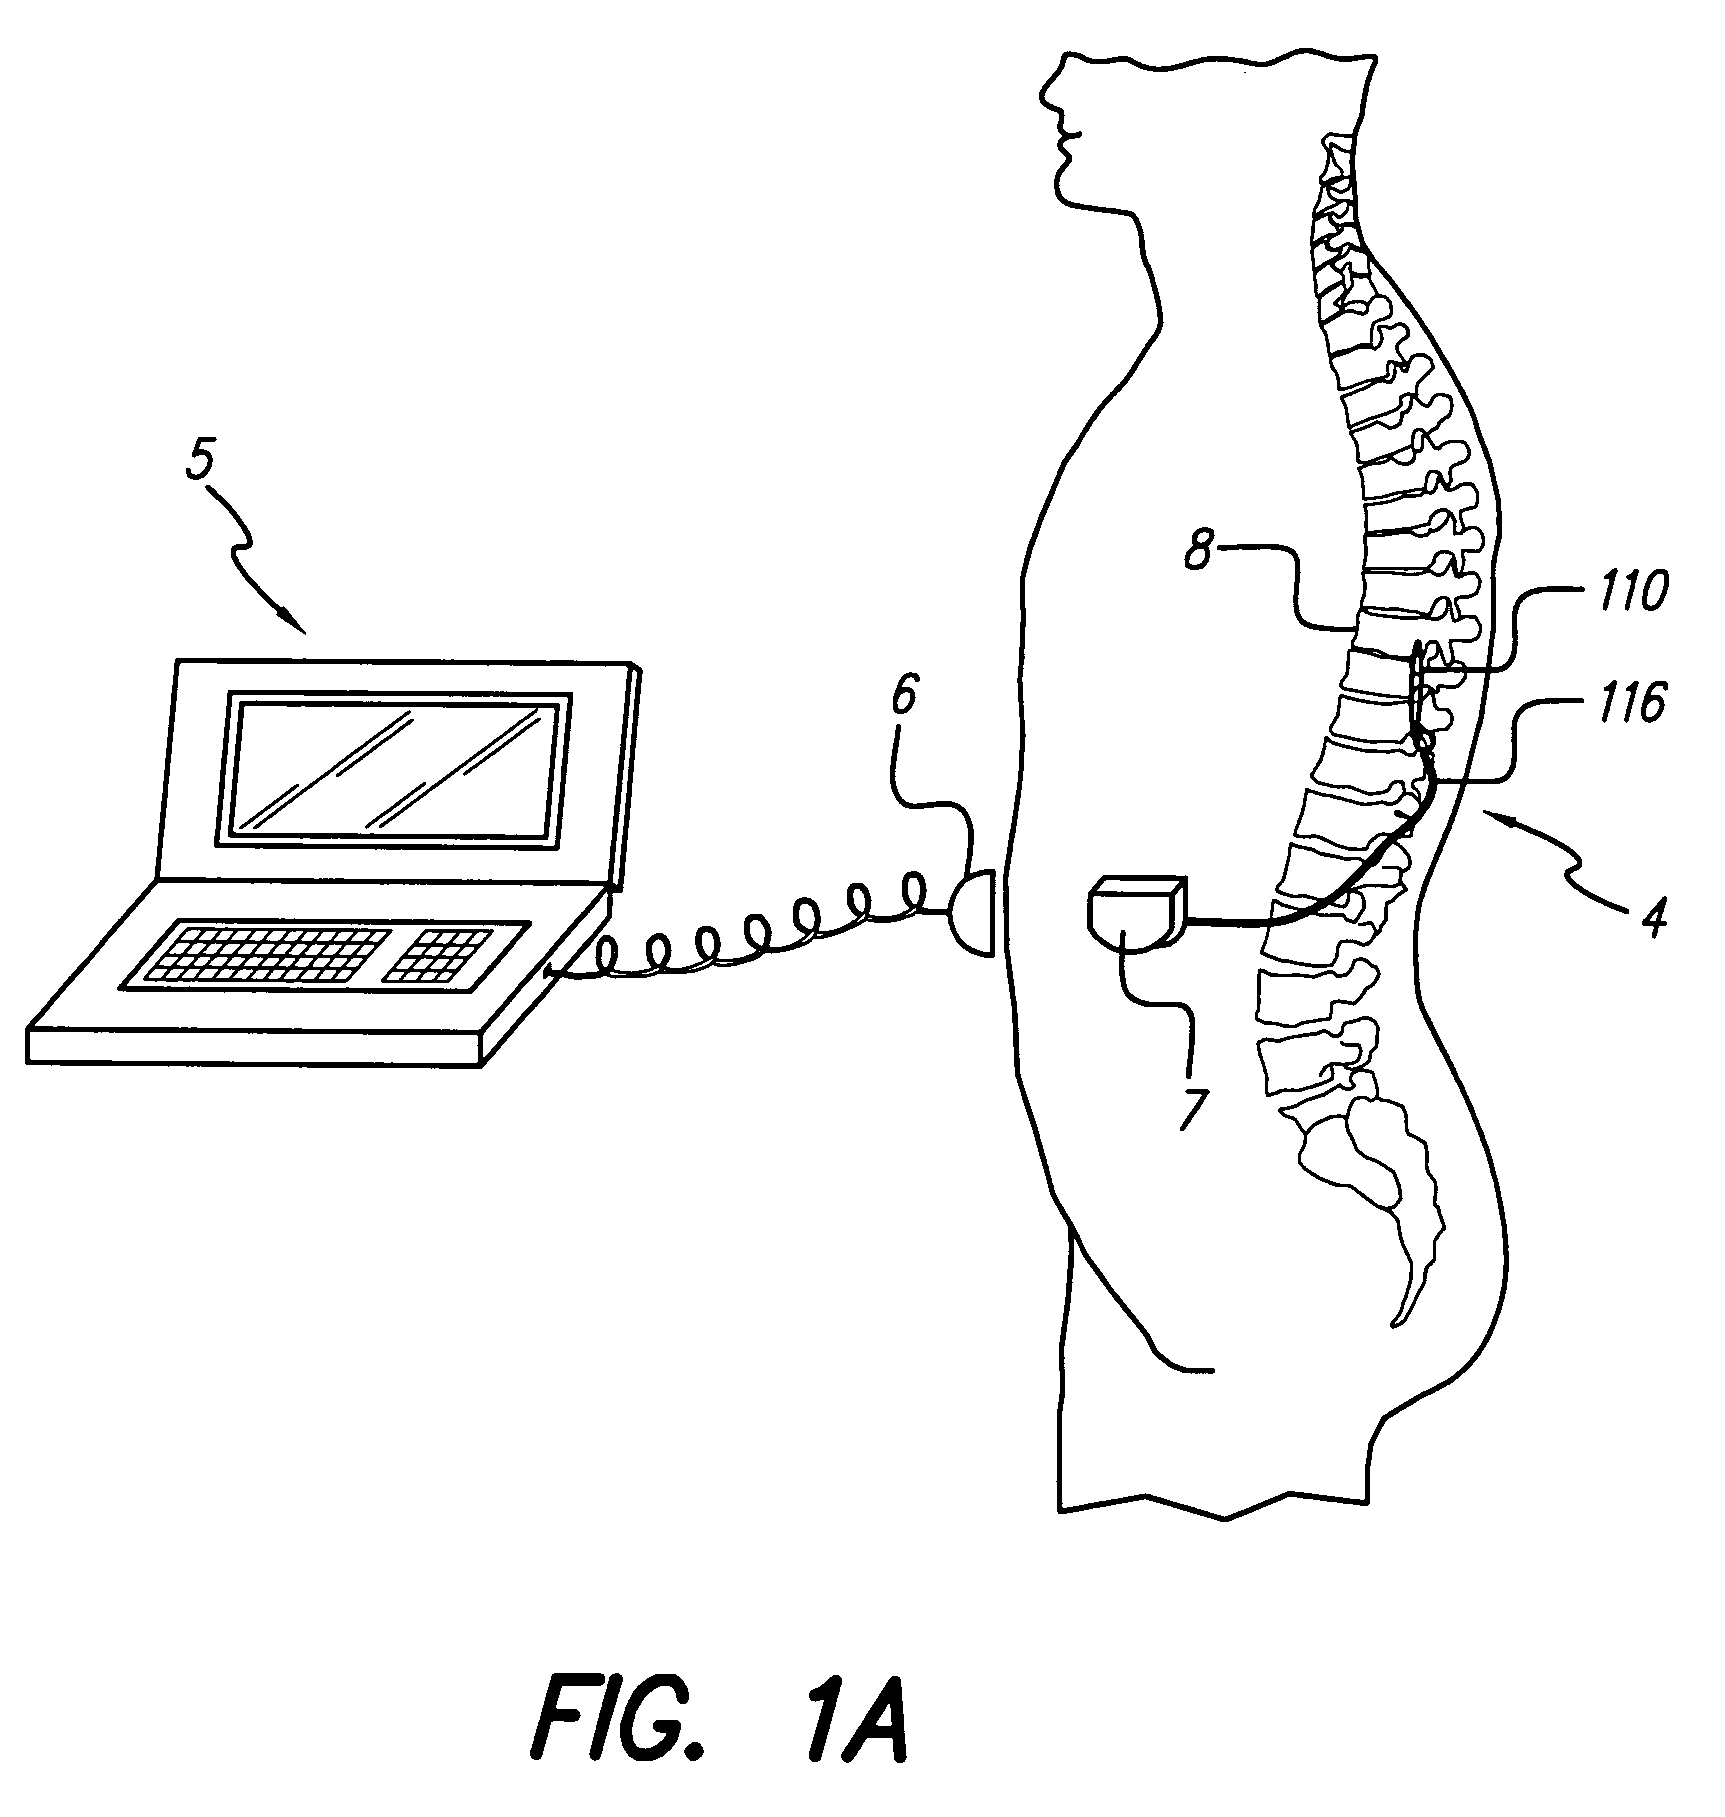 Switched-matrix output for multi-channel implantable stimulator